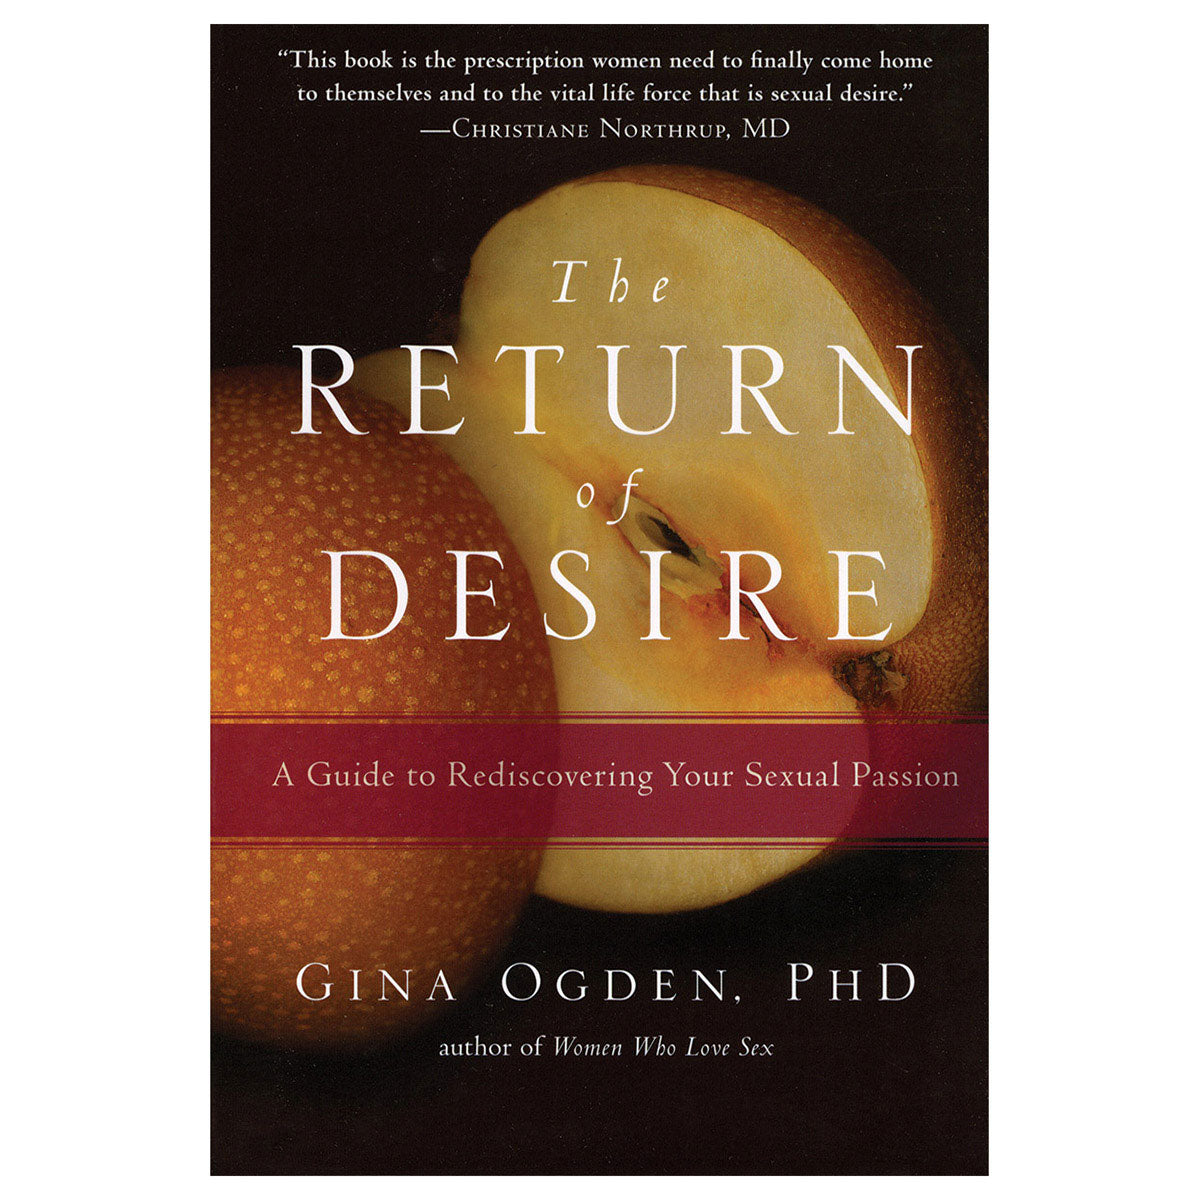 Return of Desire - A Guide to Rediscovering Your Sexual Passion - Trumpeter Books